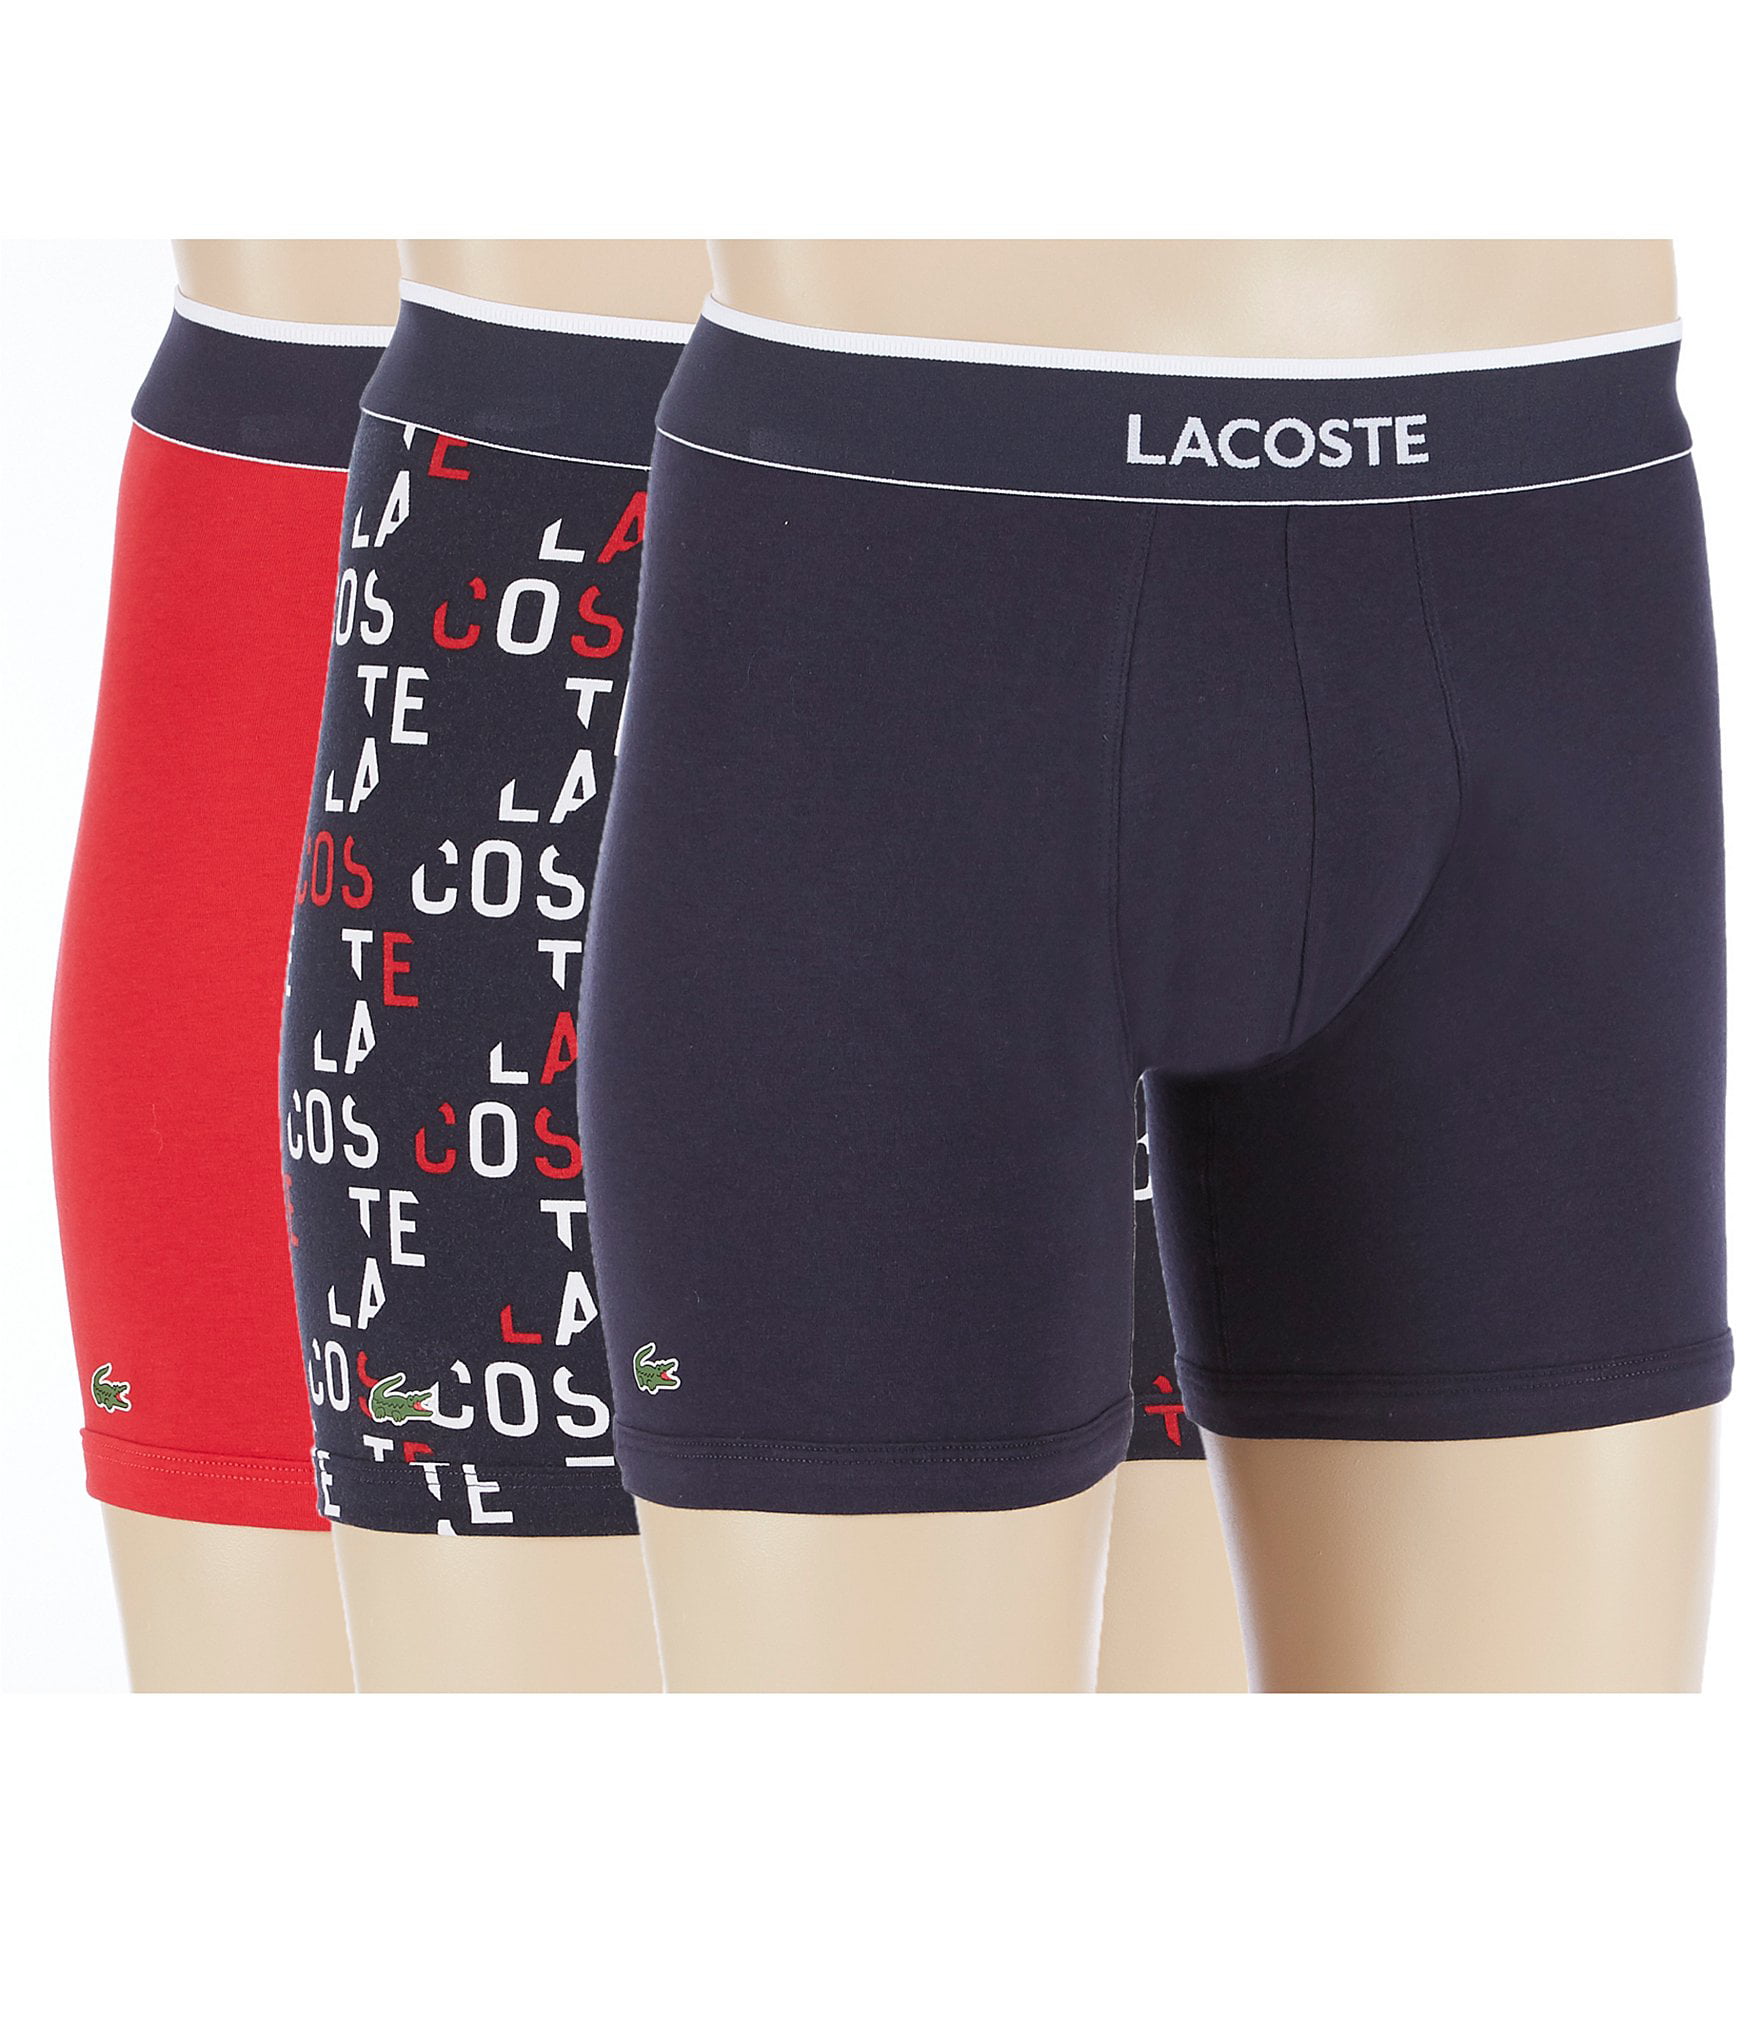 Lacoste Mens Boxer Shorts Pack of 3 Cotton Stretch Colours red/Marine/Black